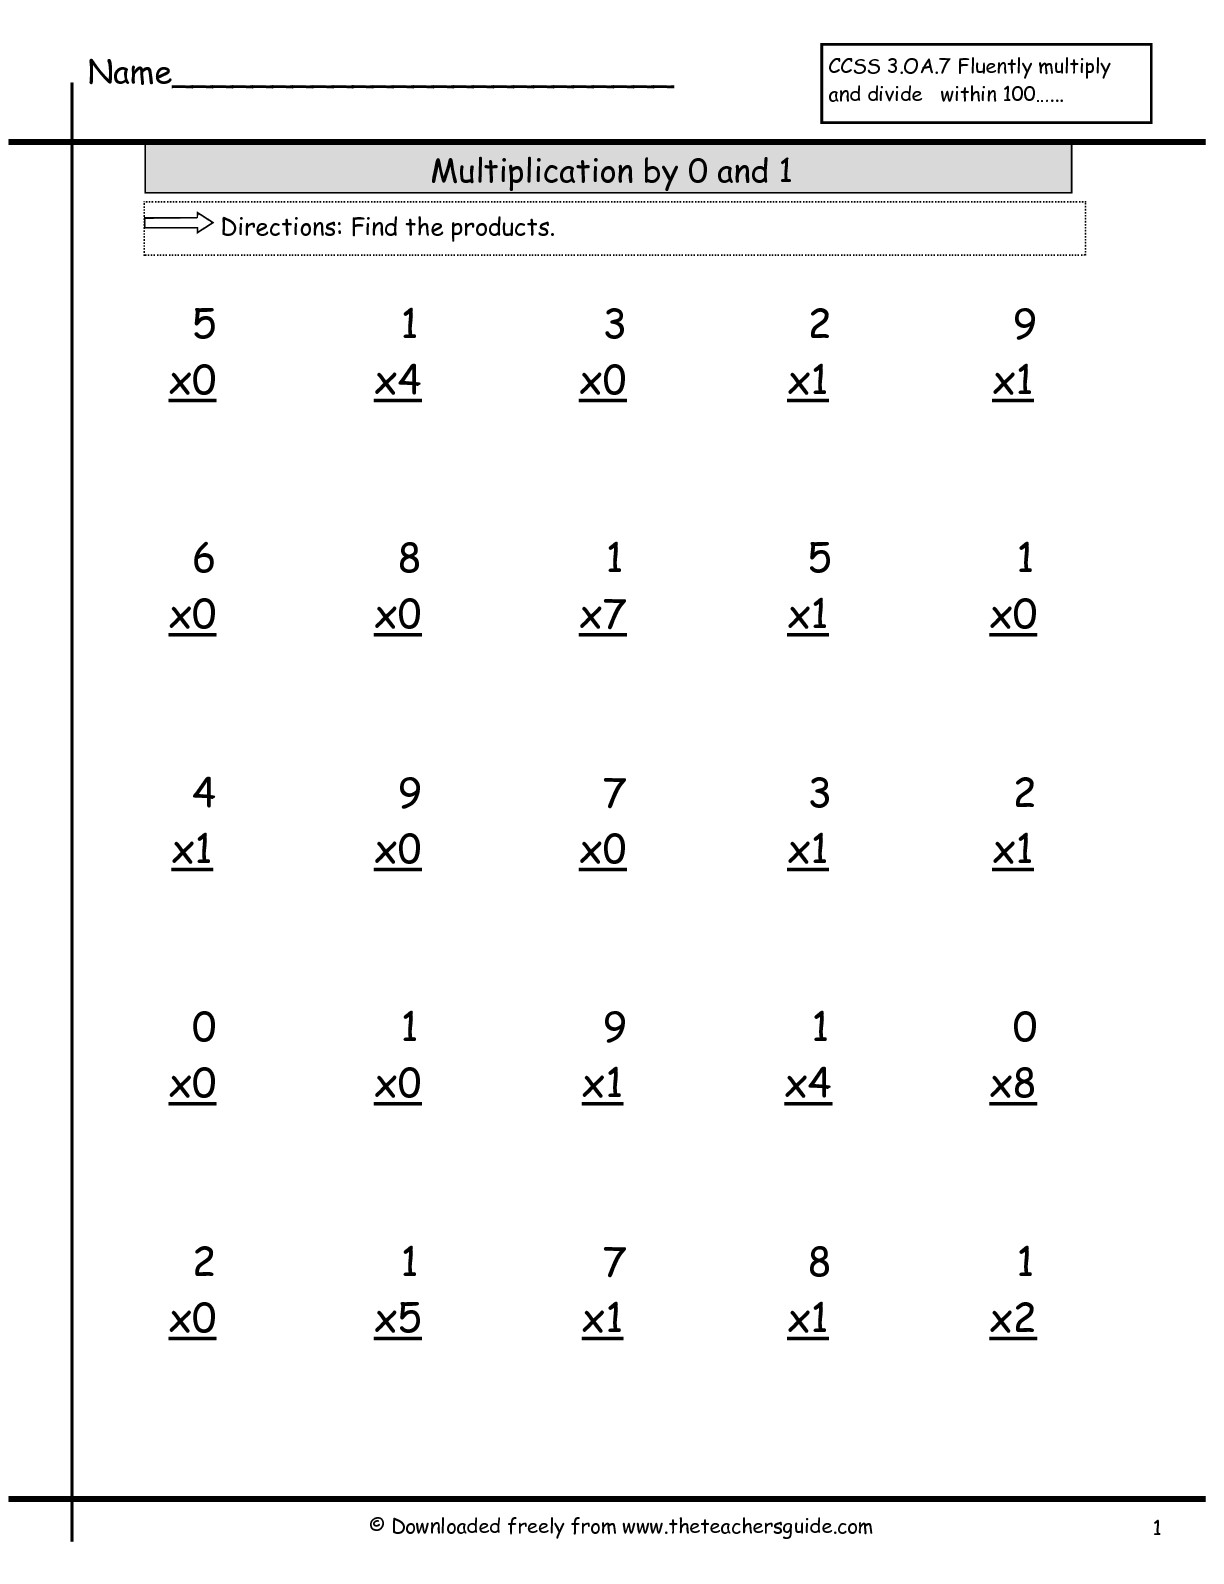 Multiplication Facts Worksheets From The Teacher's Guide regarding 2 Multiplication Printable